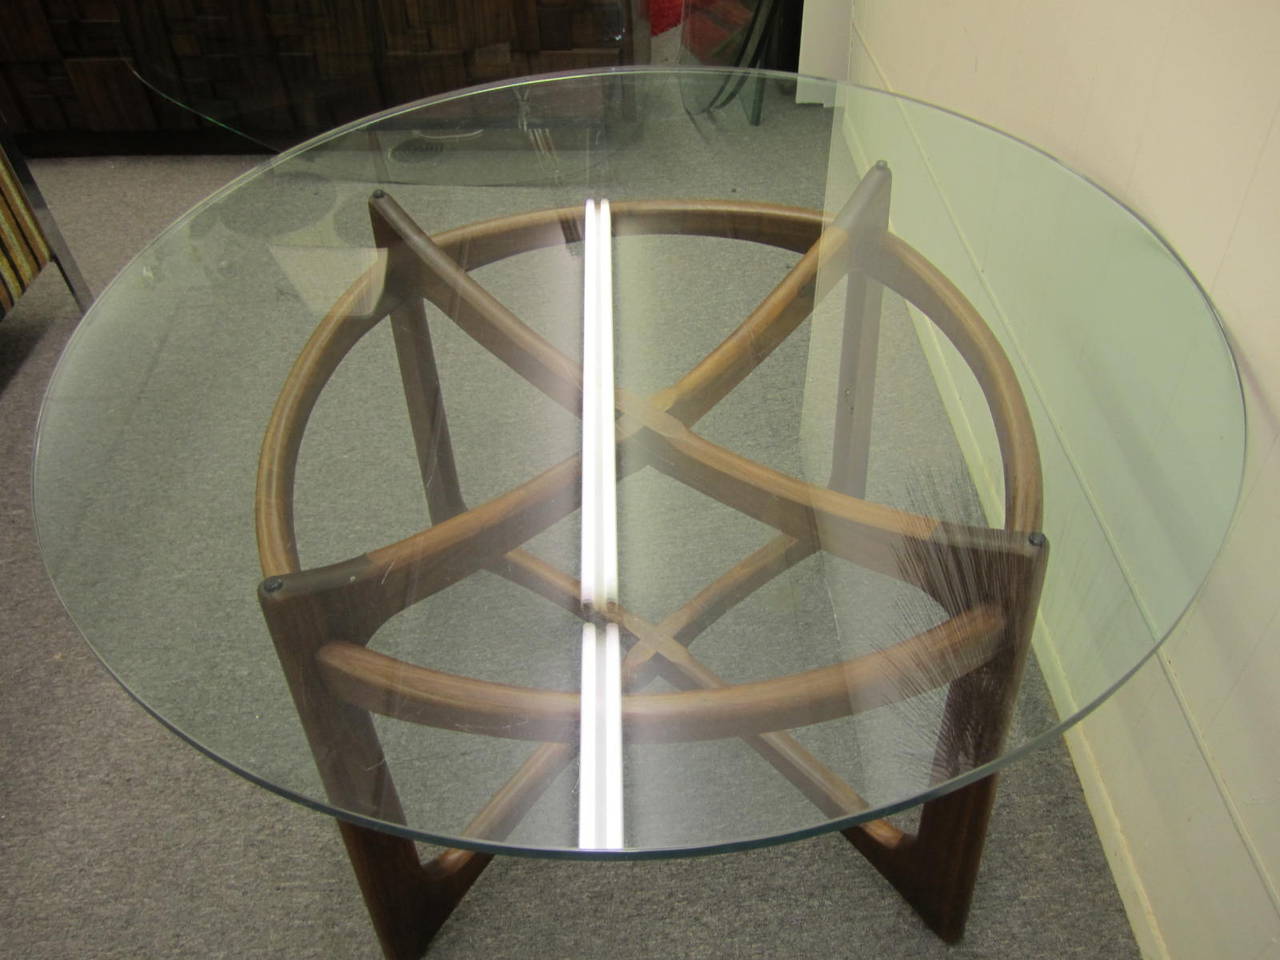 Gorgeous Adrian Pearsall sculptural walnut dining table. This piece is in fantastic vintage condition-sure to be a treasured addition to your mid-century inspired home.  Please see our huge collection of Adrian Pearsall designed furniture listed in